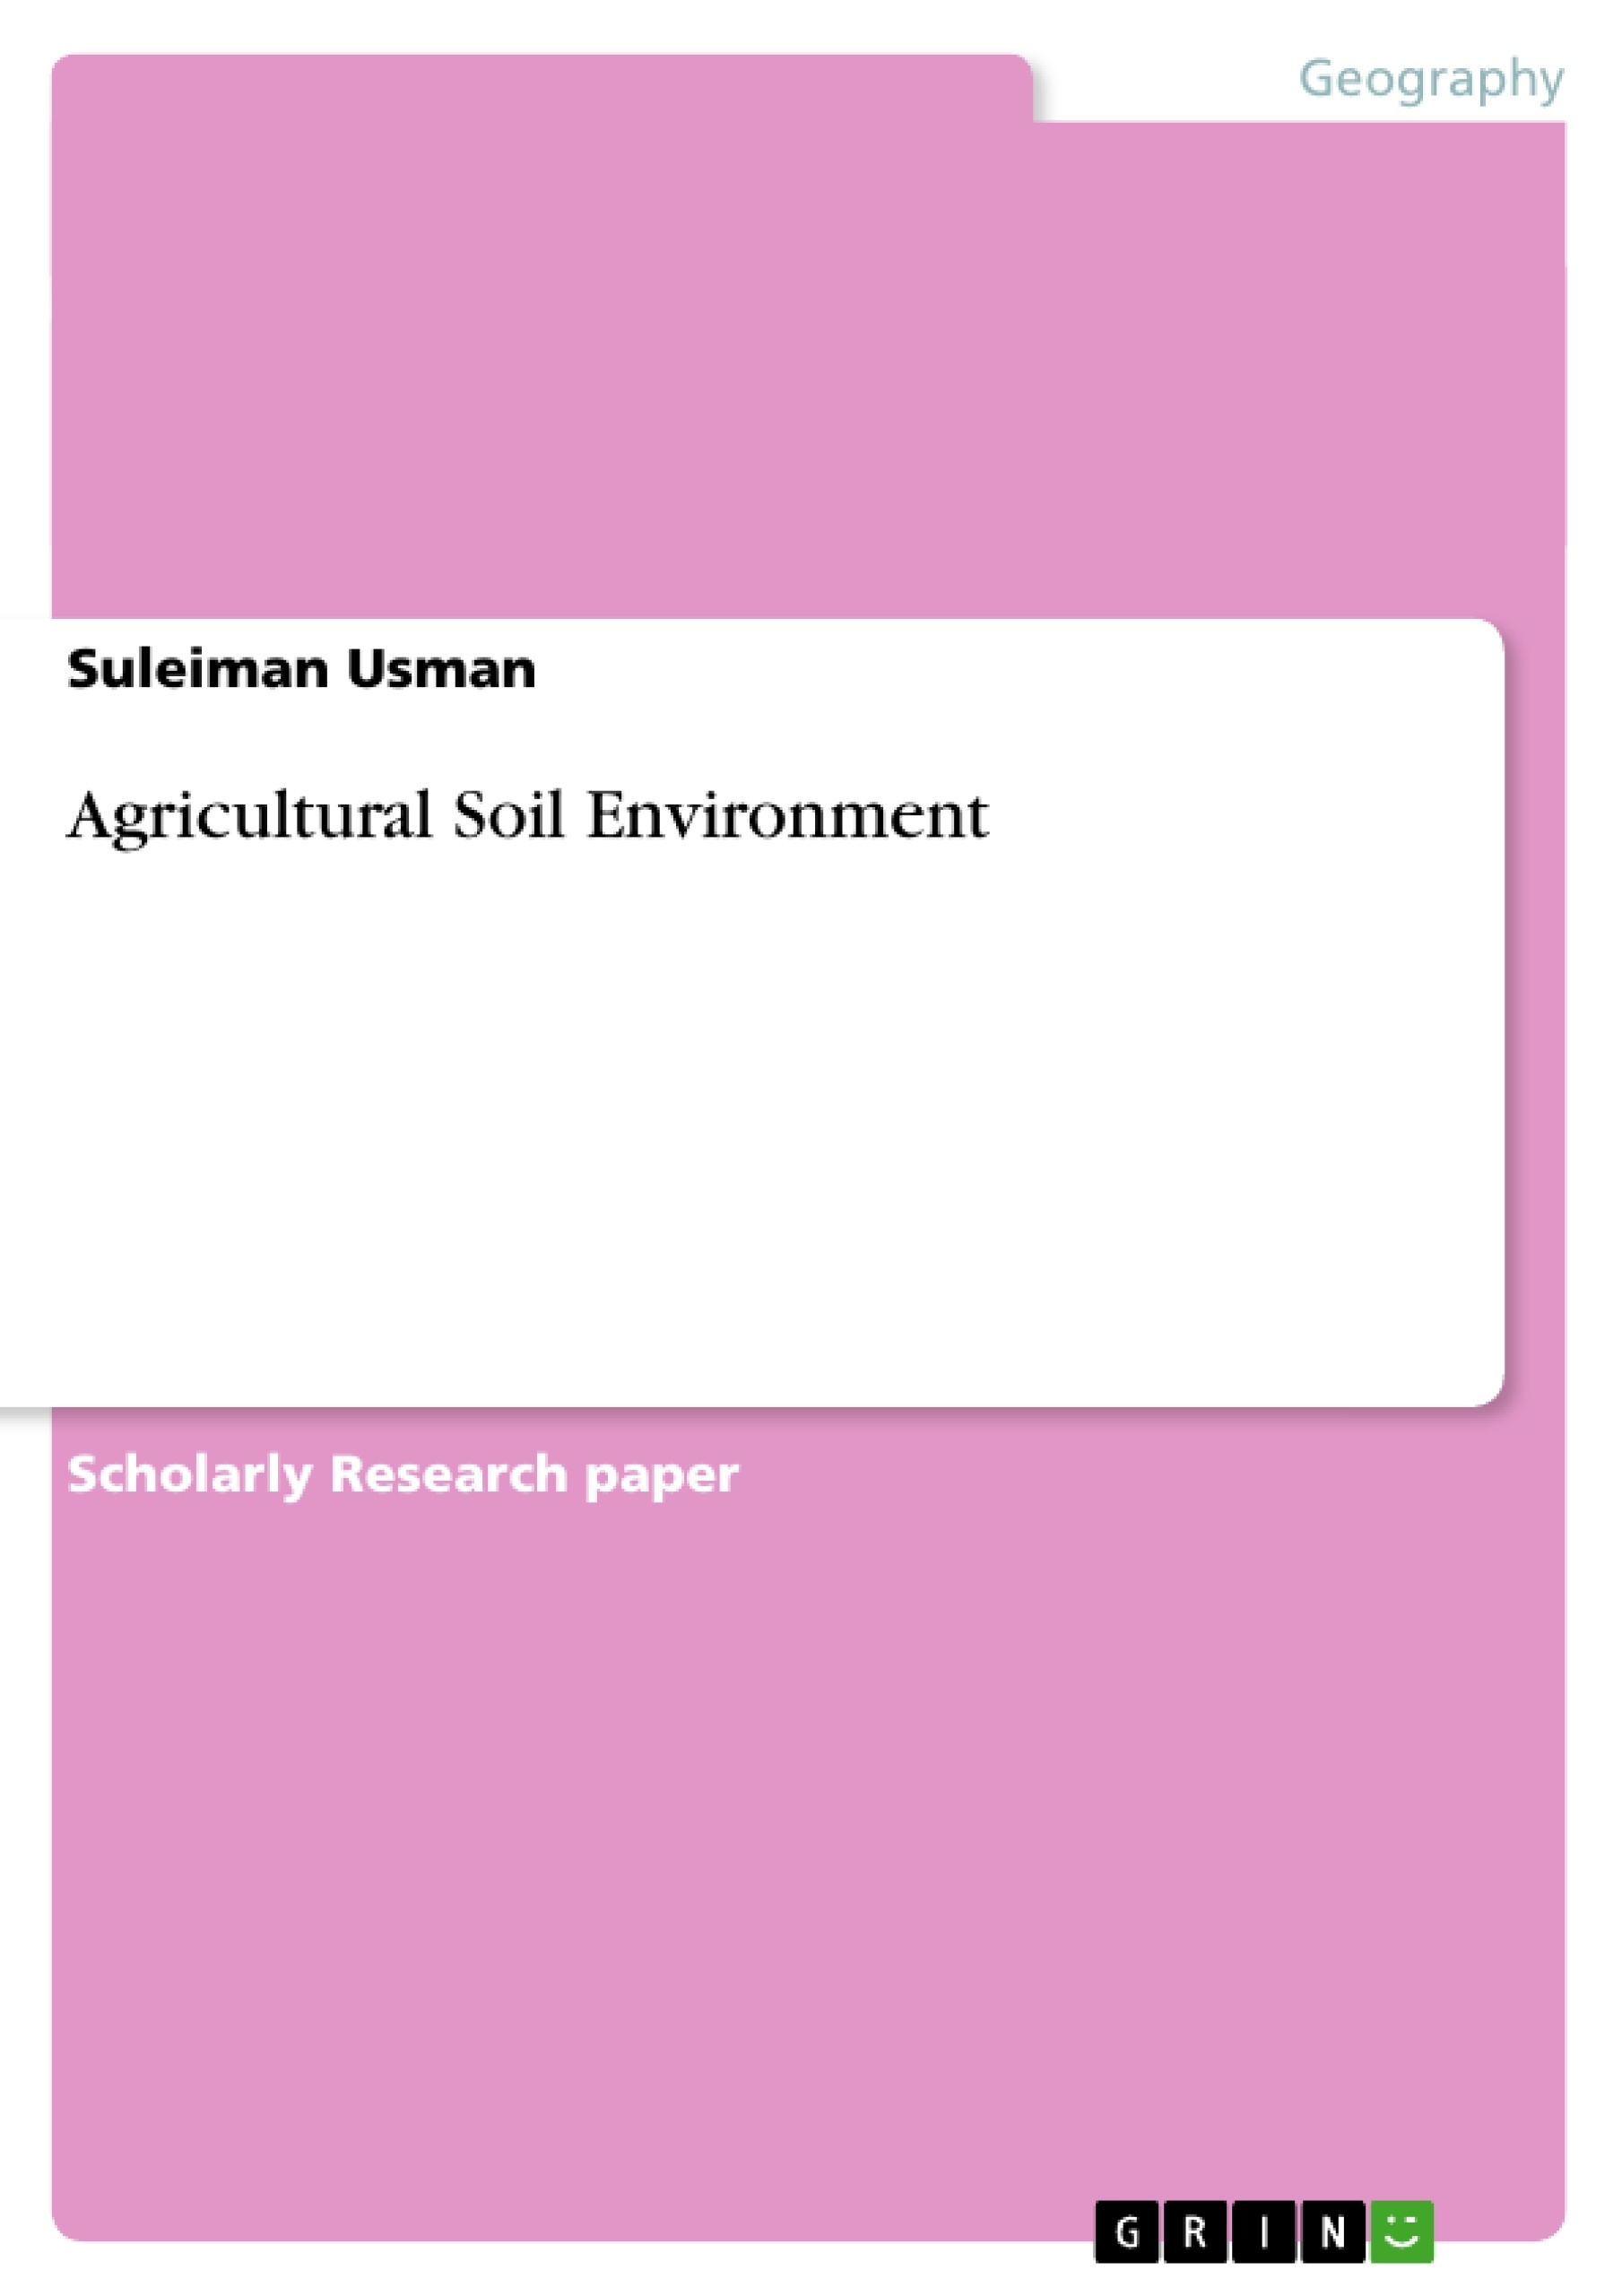 Title: Agricultural Soil Environment